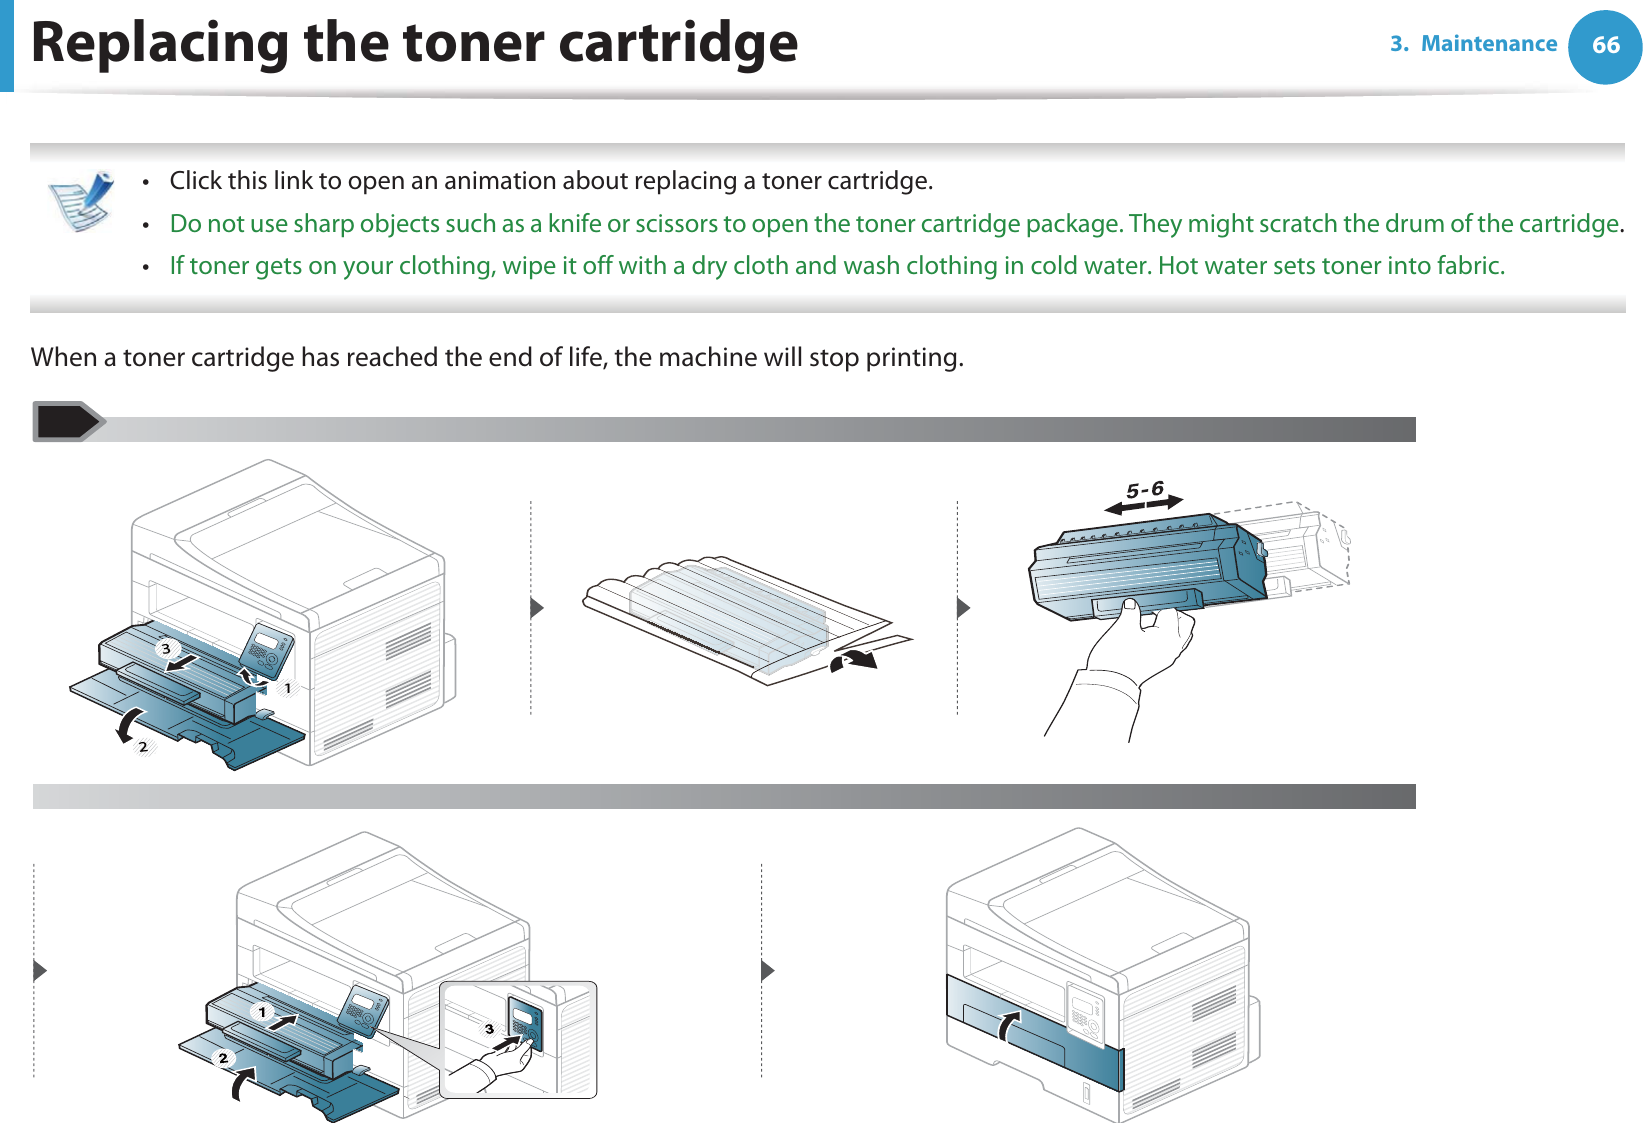 663. MaintenanceReplacing the toner cartridge • Click this link to open an animation about replacing a toner cartridge.•Do not use sharp objects such as a knife or scissors to open the toner cartridge package. They might scratch the drum of the cartridge.•If toner gets on your clothing, wipe it off with a dry cloth and wash clothing in cold water. Hot water sets toner into fabric. When a toner cartridge has reached the end of life, the machine will stop printing. 3 21